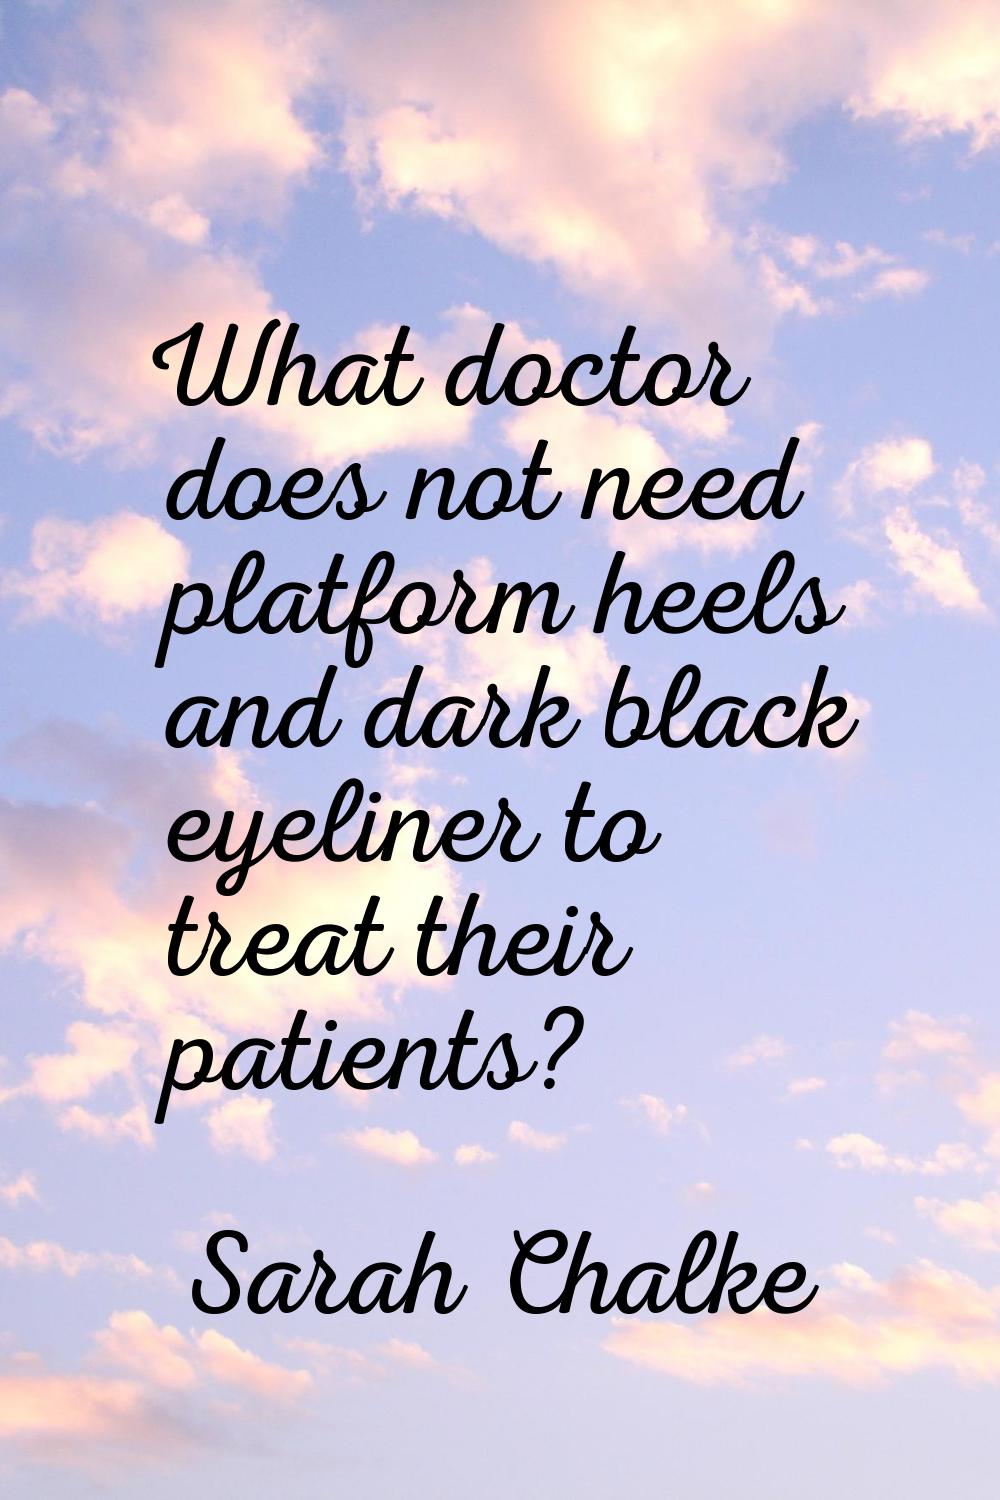 What doctor does not need platform heels and dark black eyeliner to treat their patients?